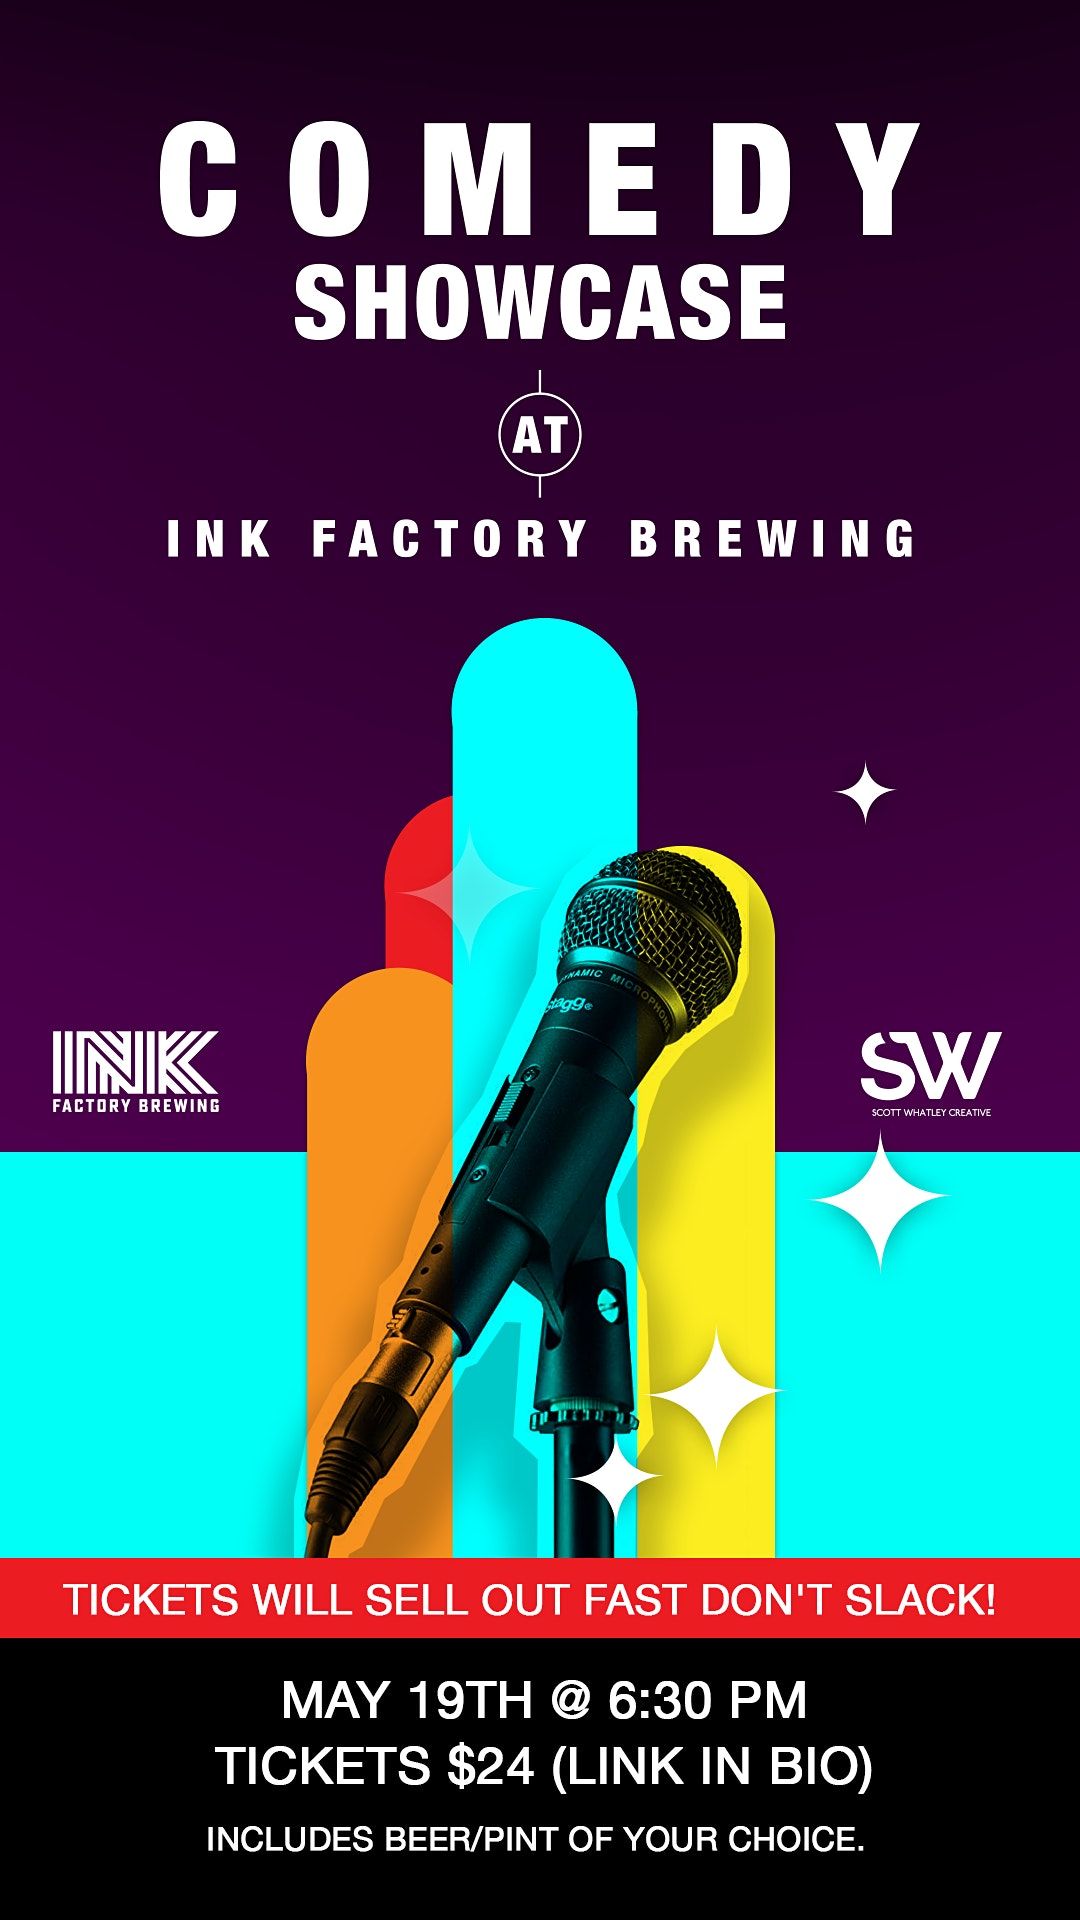 Comedy Showcase at Ink Factory Brewing 7\/21 - 6:30 PM Show